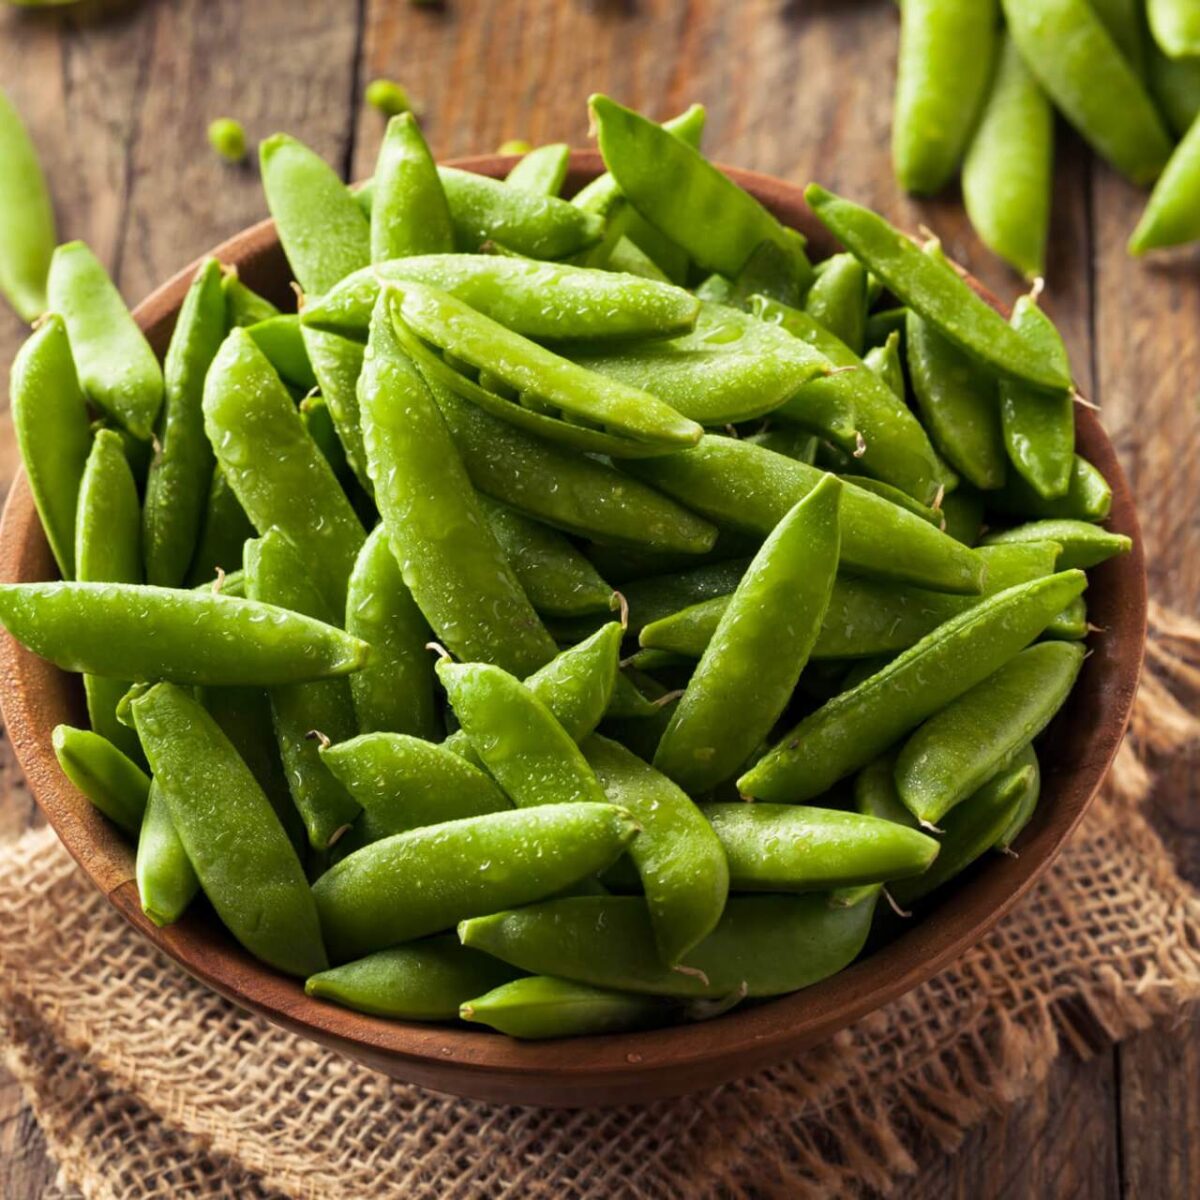 Sugar Snap Peas Are Good For Your Health.